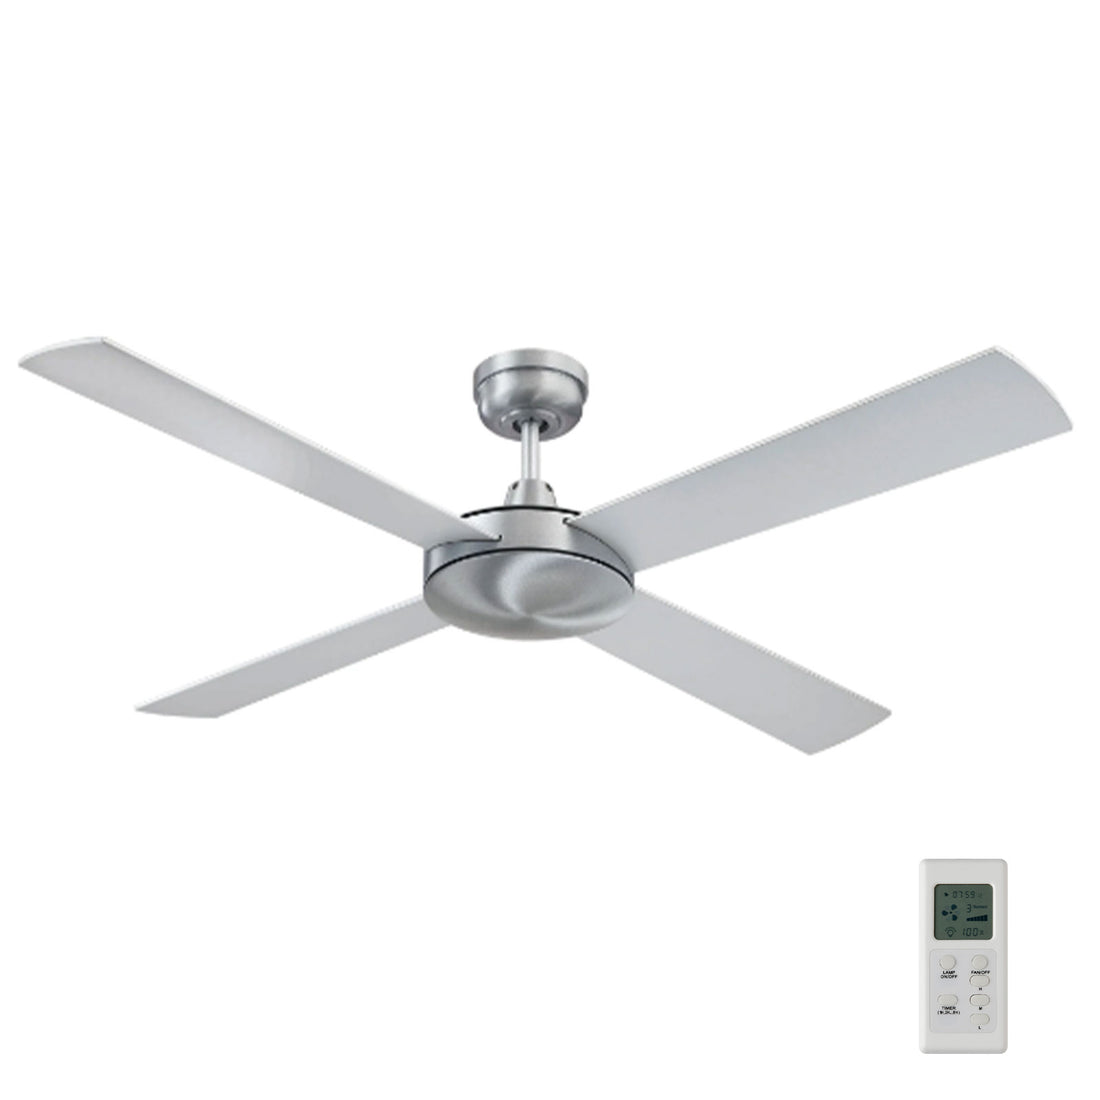 Caprice Pro 130cm AC Ceiling Fan with Remote